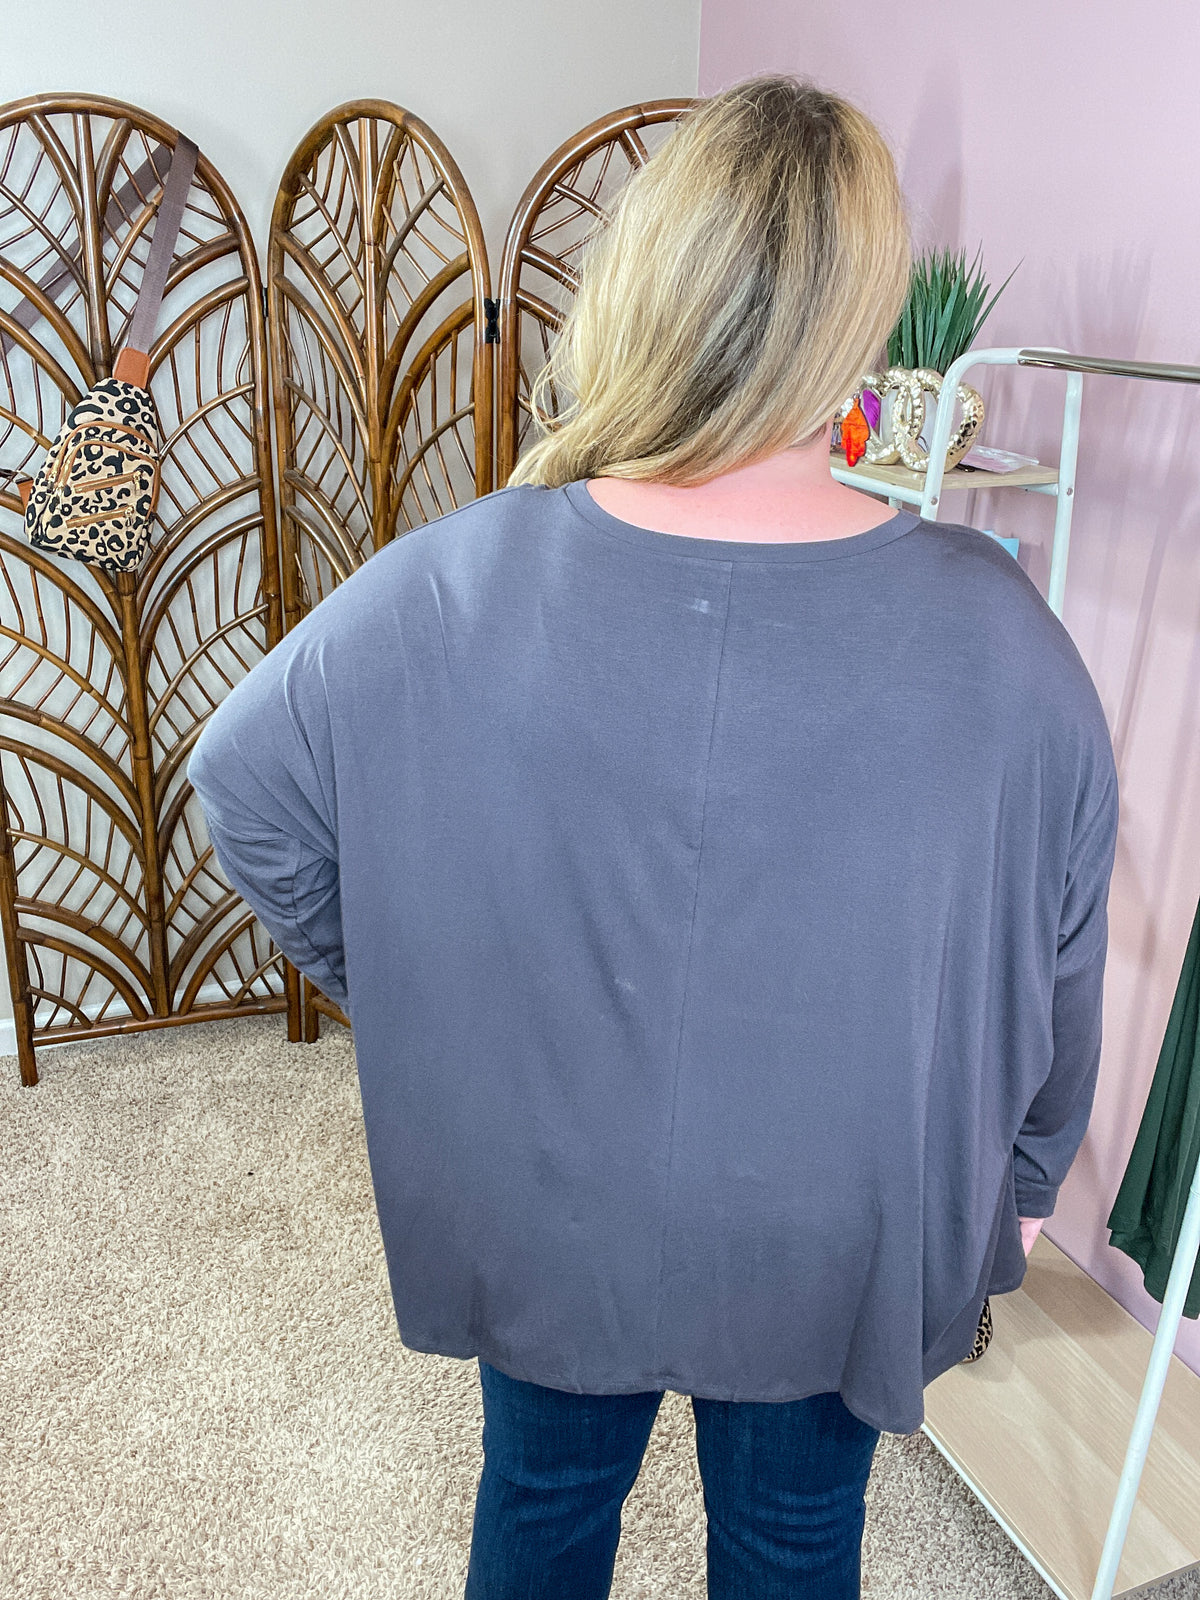 Comforts of Fall Slouchy Top - Ash